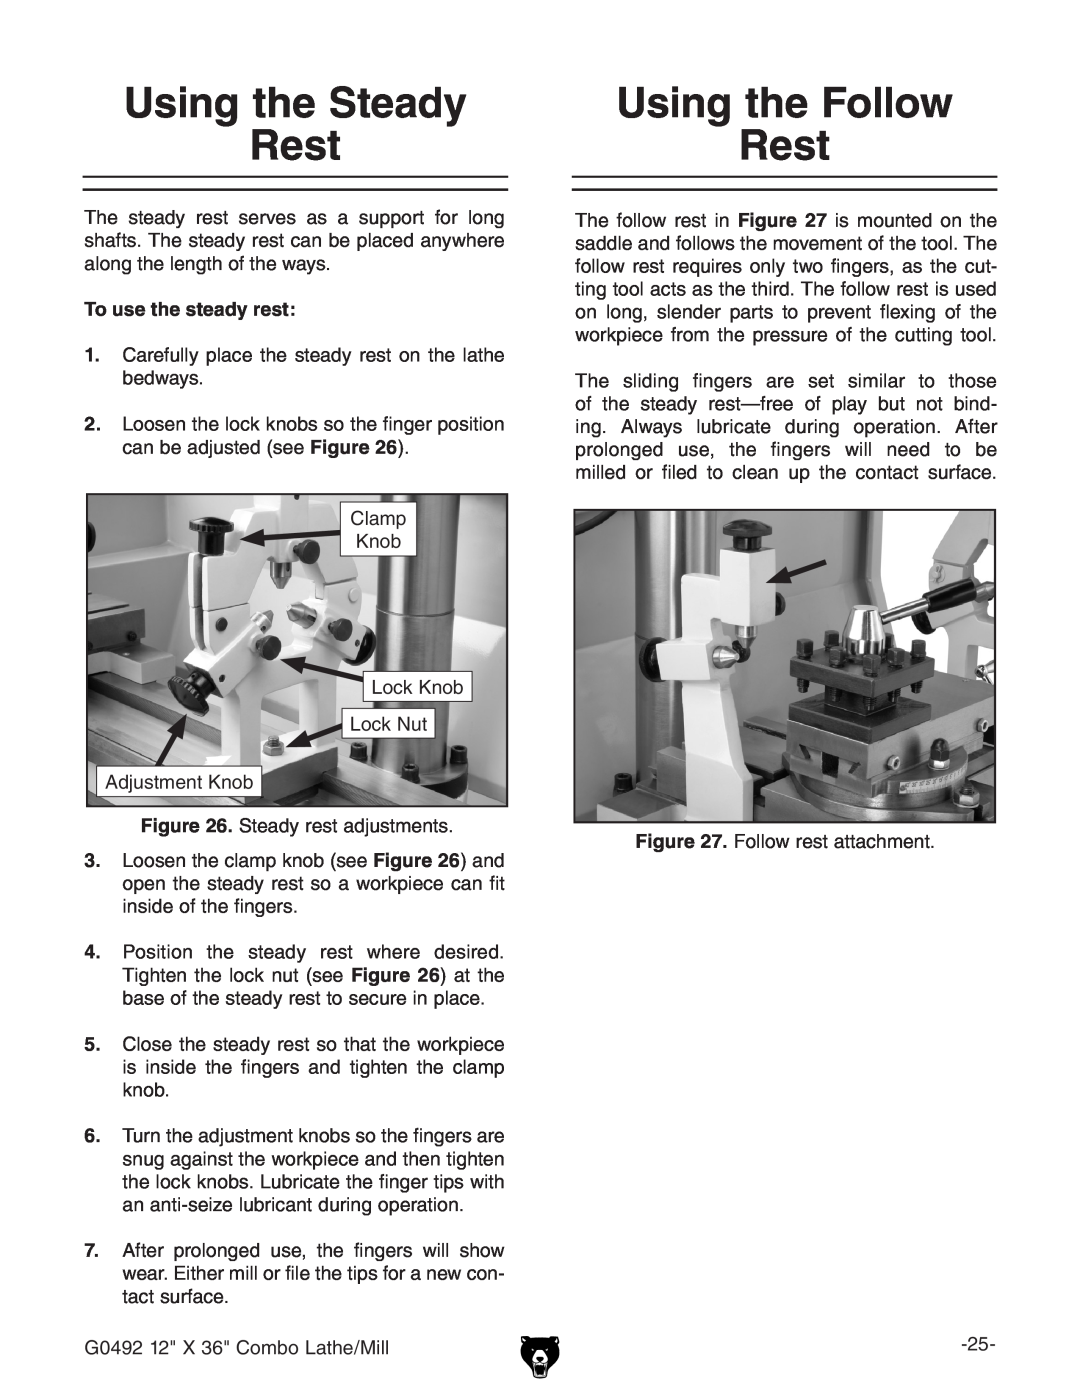 Grizzly G0492 owner manual Using the Steady Rest, Using the Follow Rest, To use the steady rest 